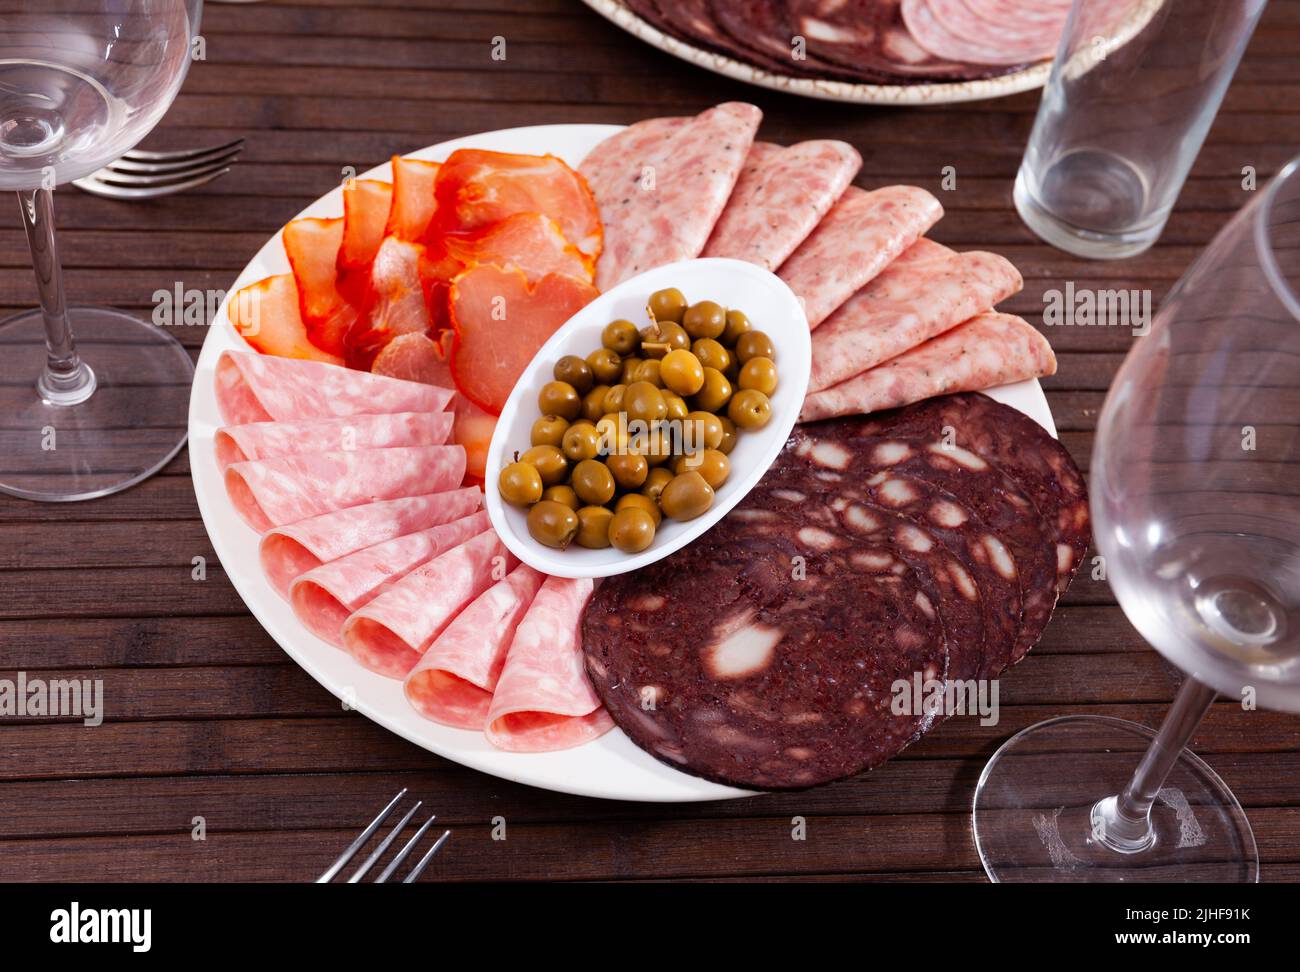 Antipasto platter with various meat and olives Stock Photo